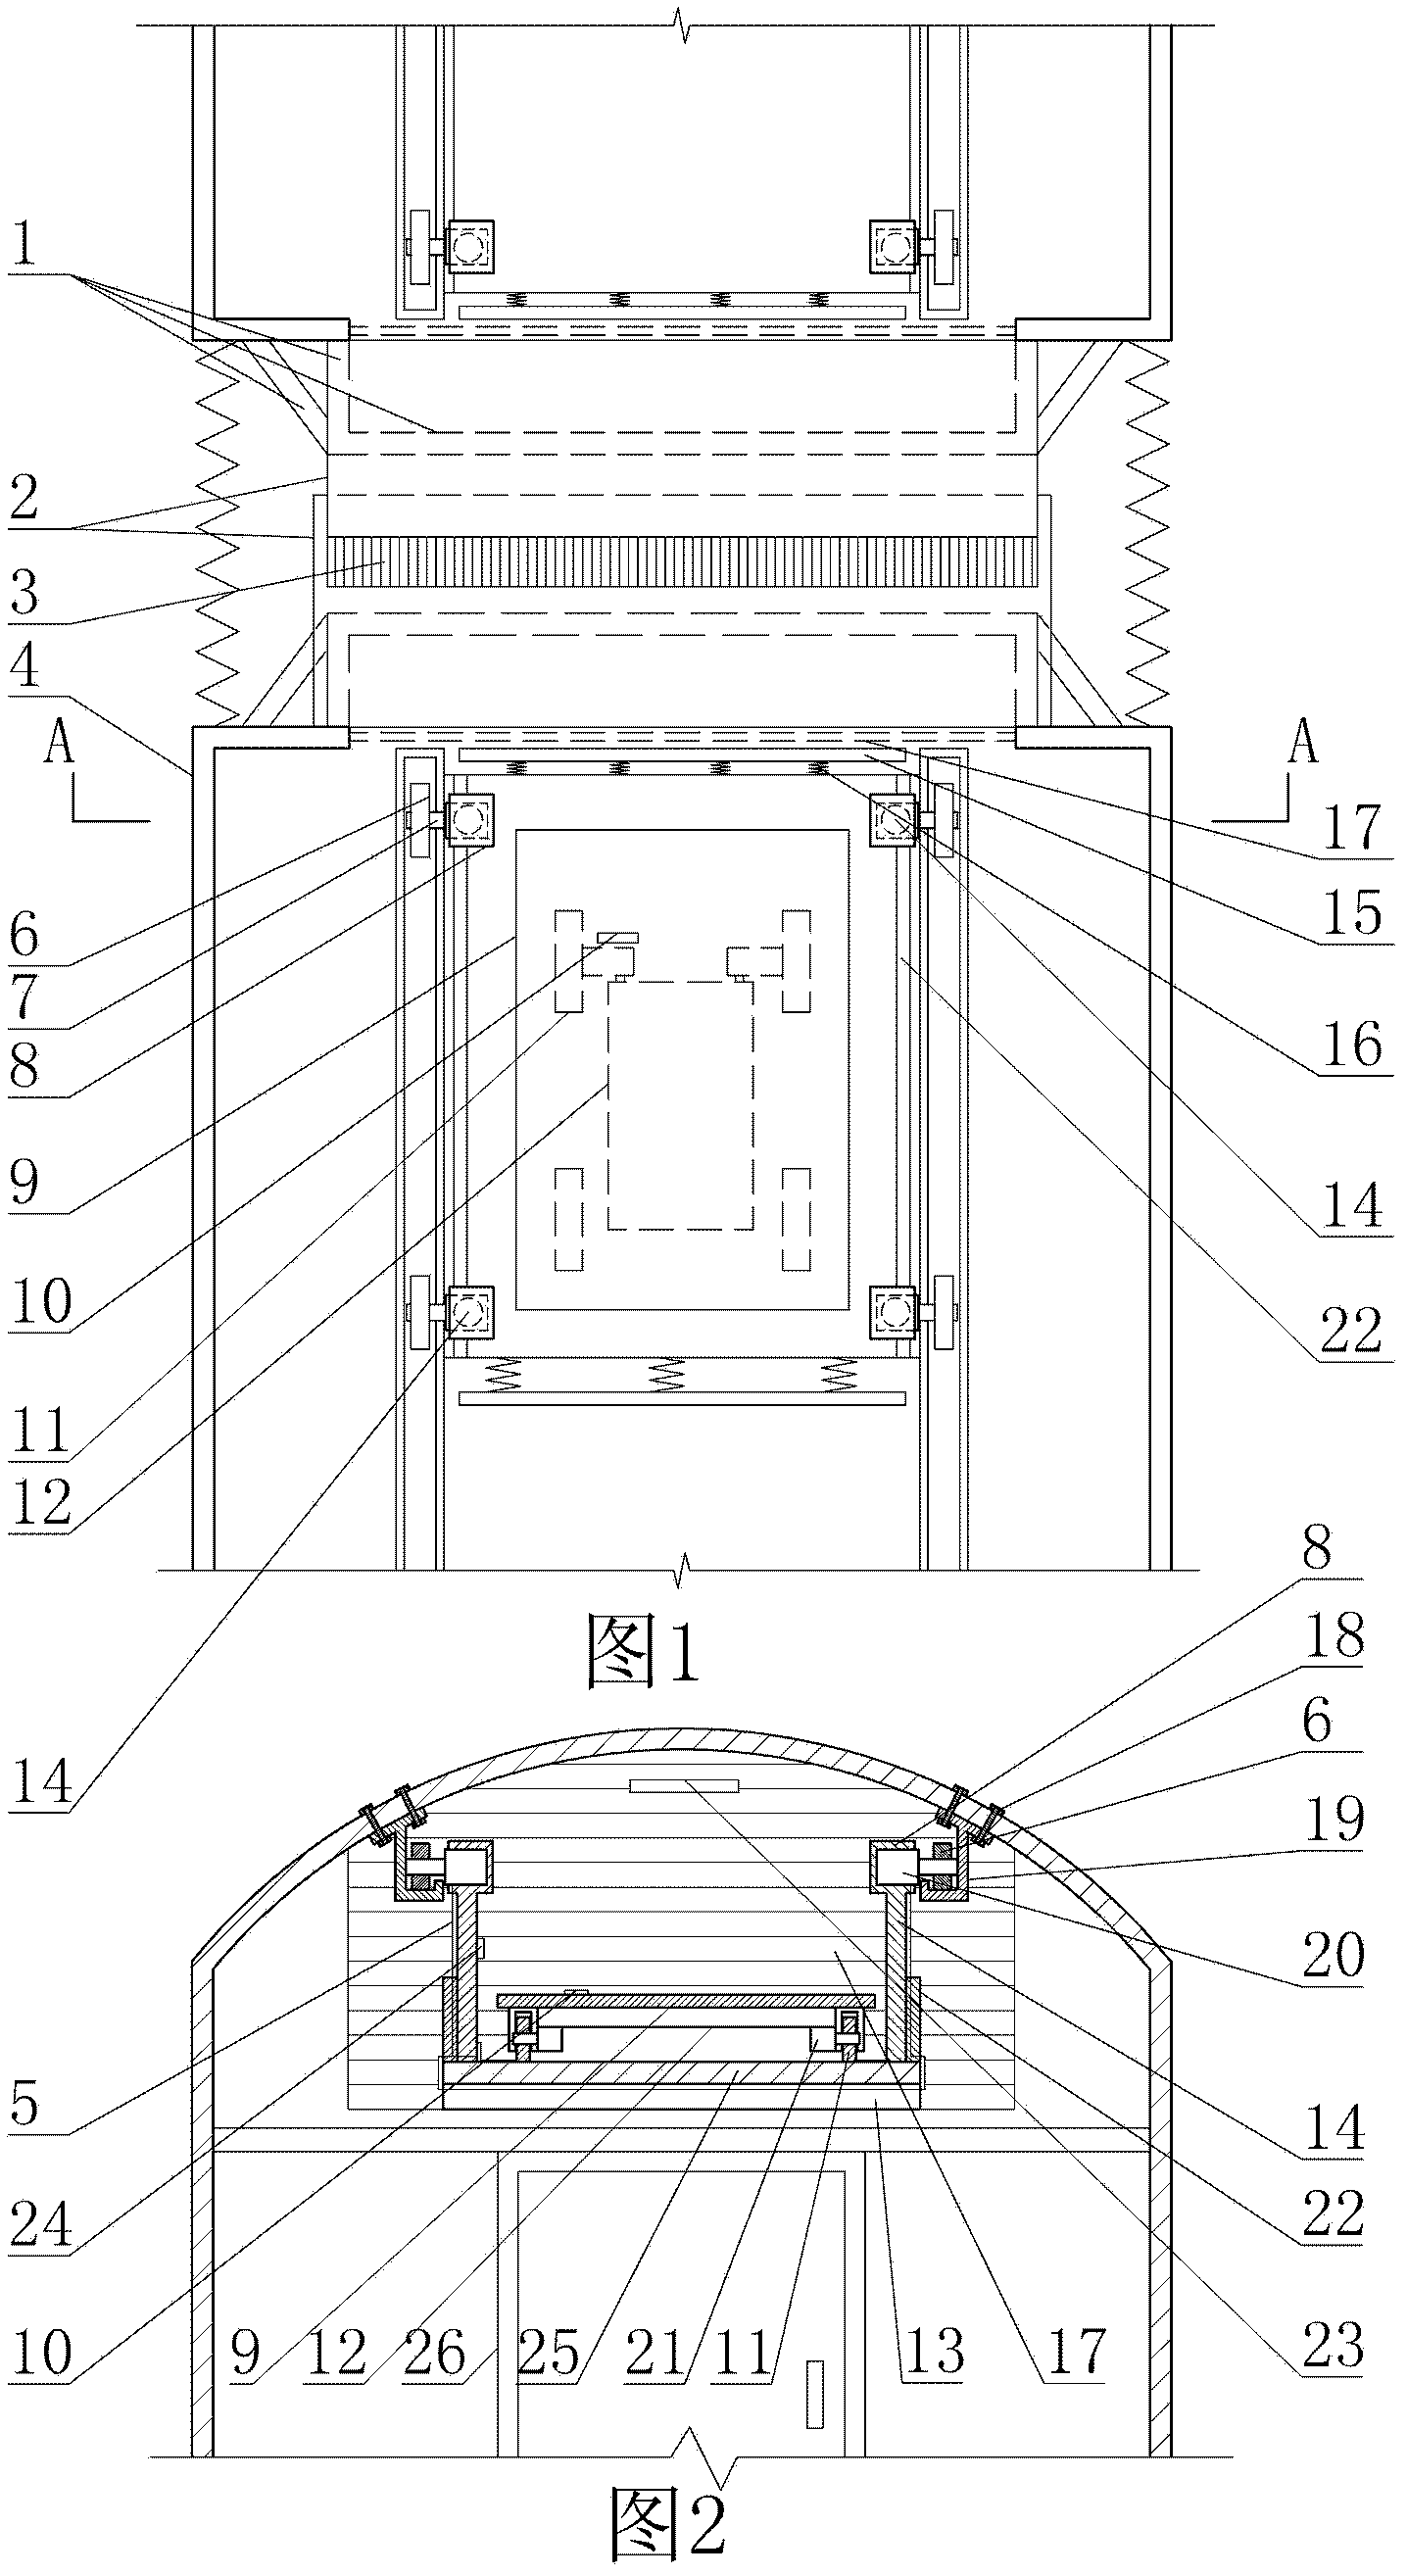 Suspended type emergency conveying system for train carriage